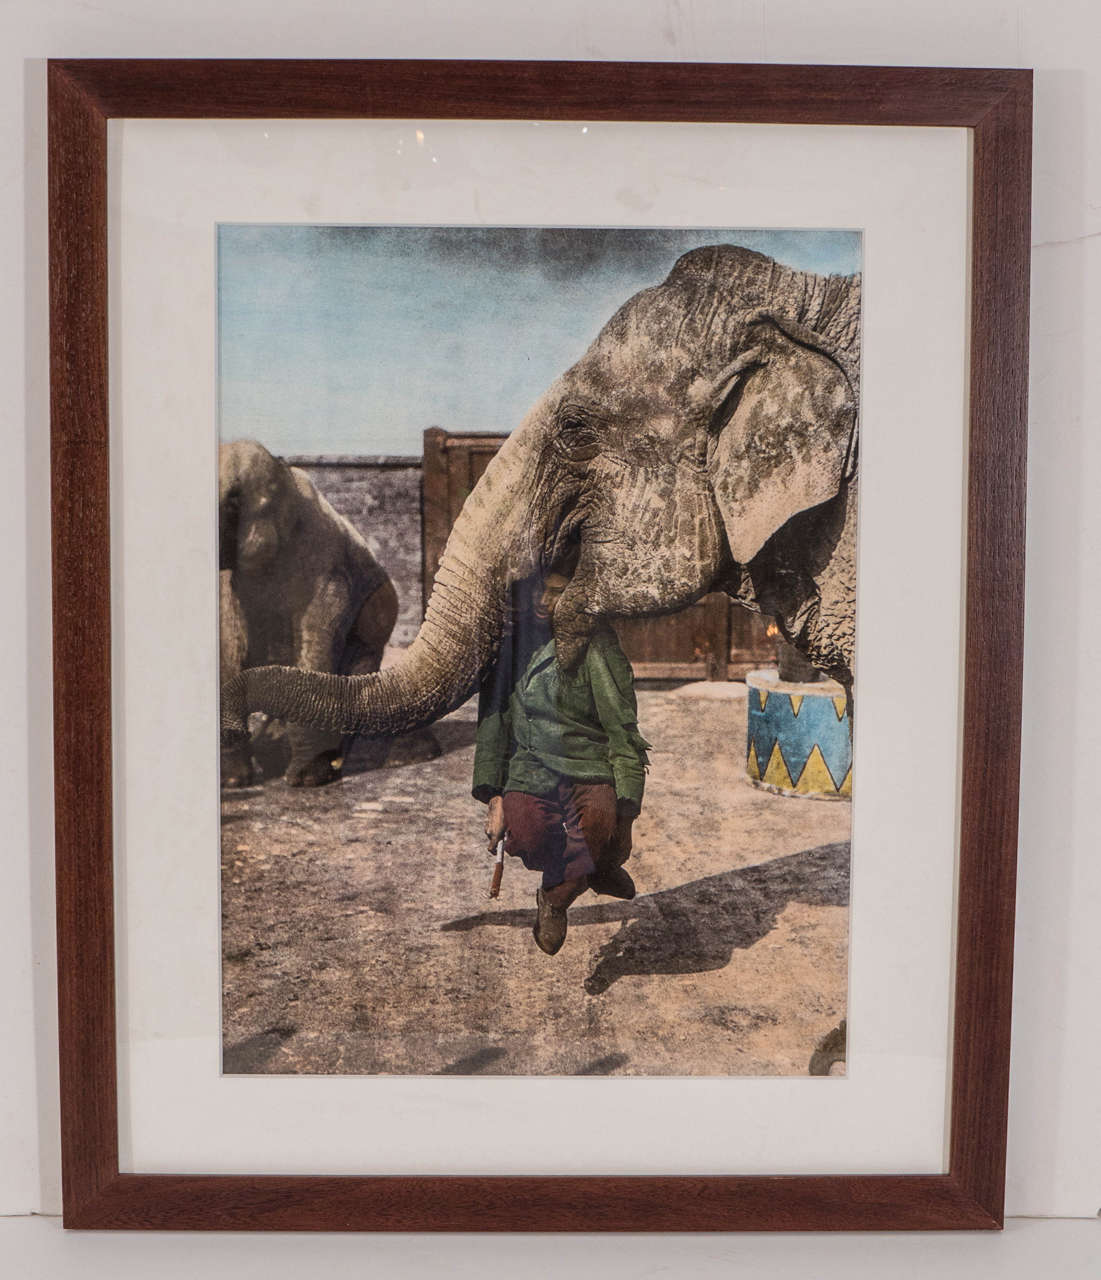 Tinted photographic print of elephant trainer and his elephant, matted and framed.